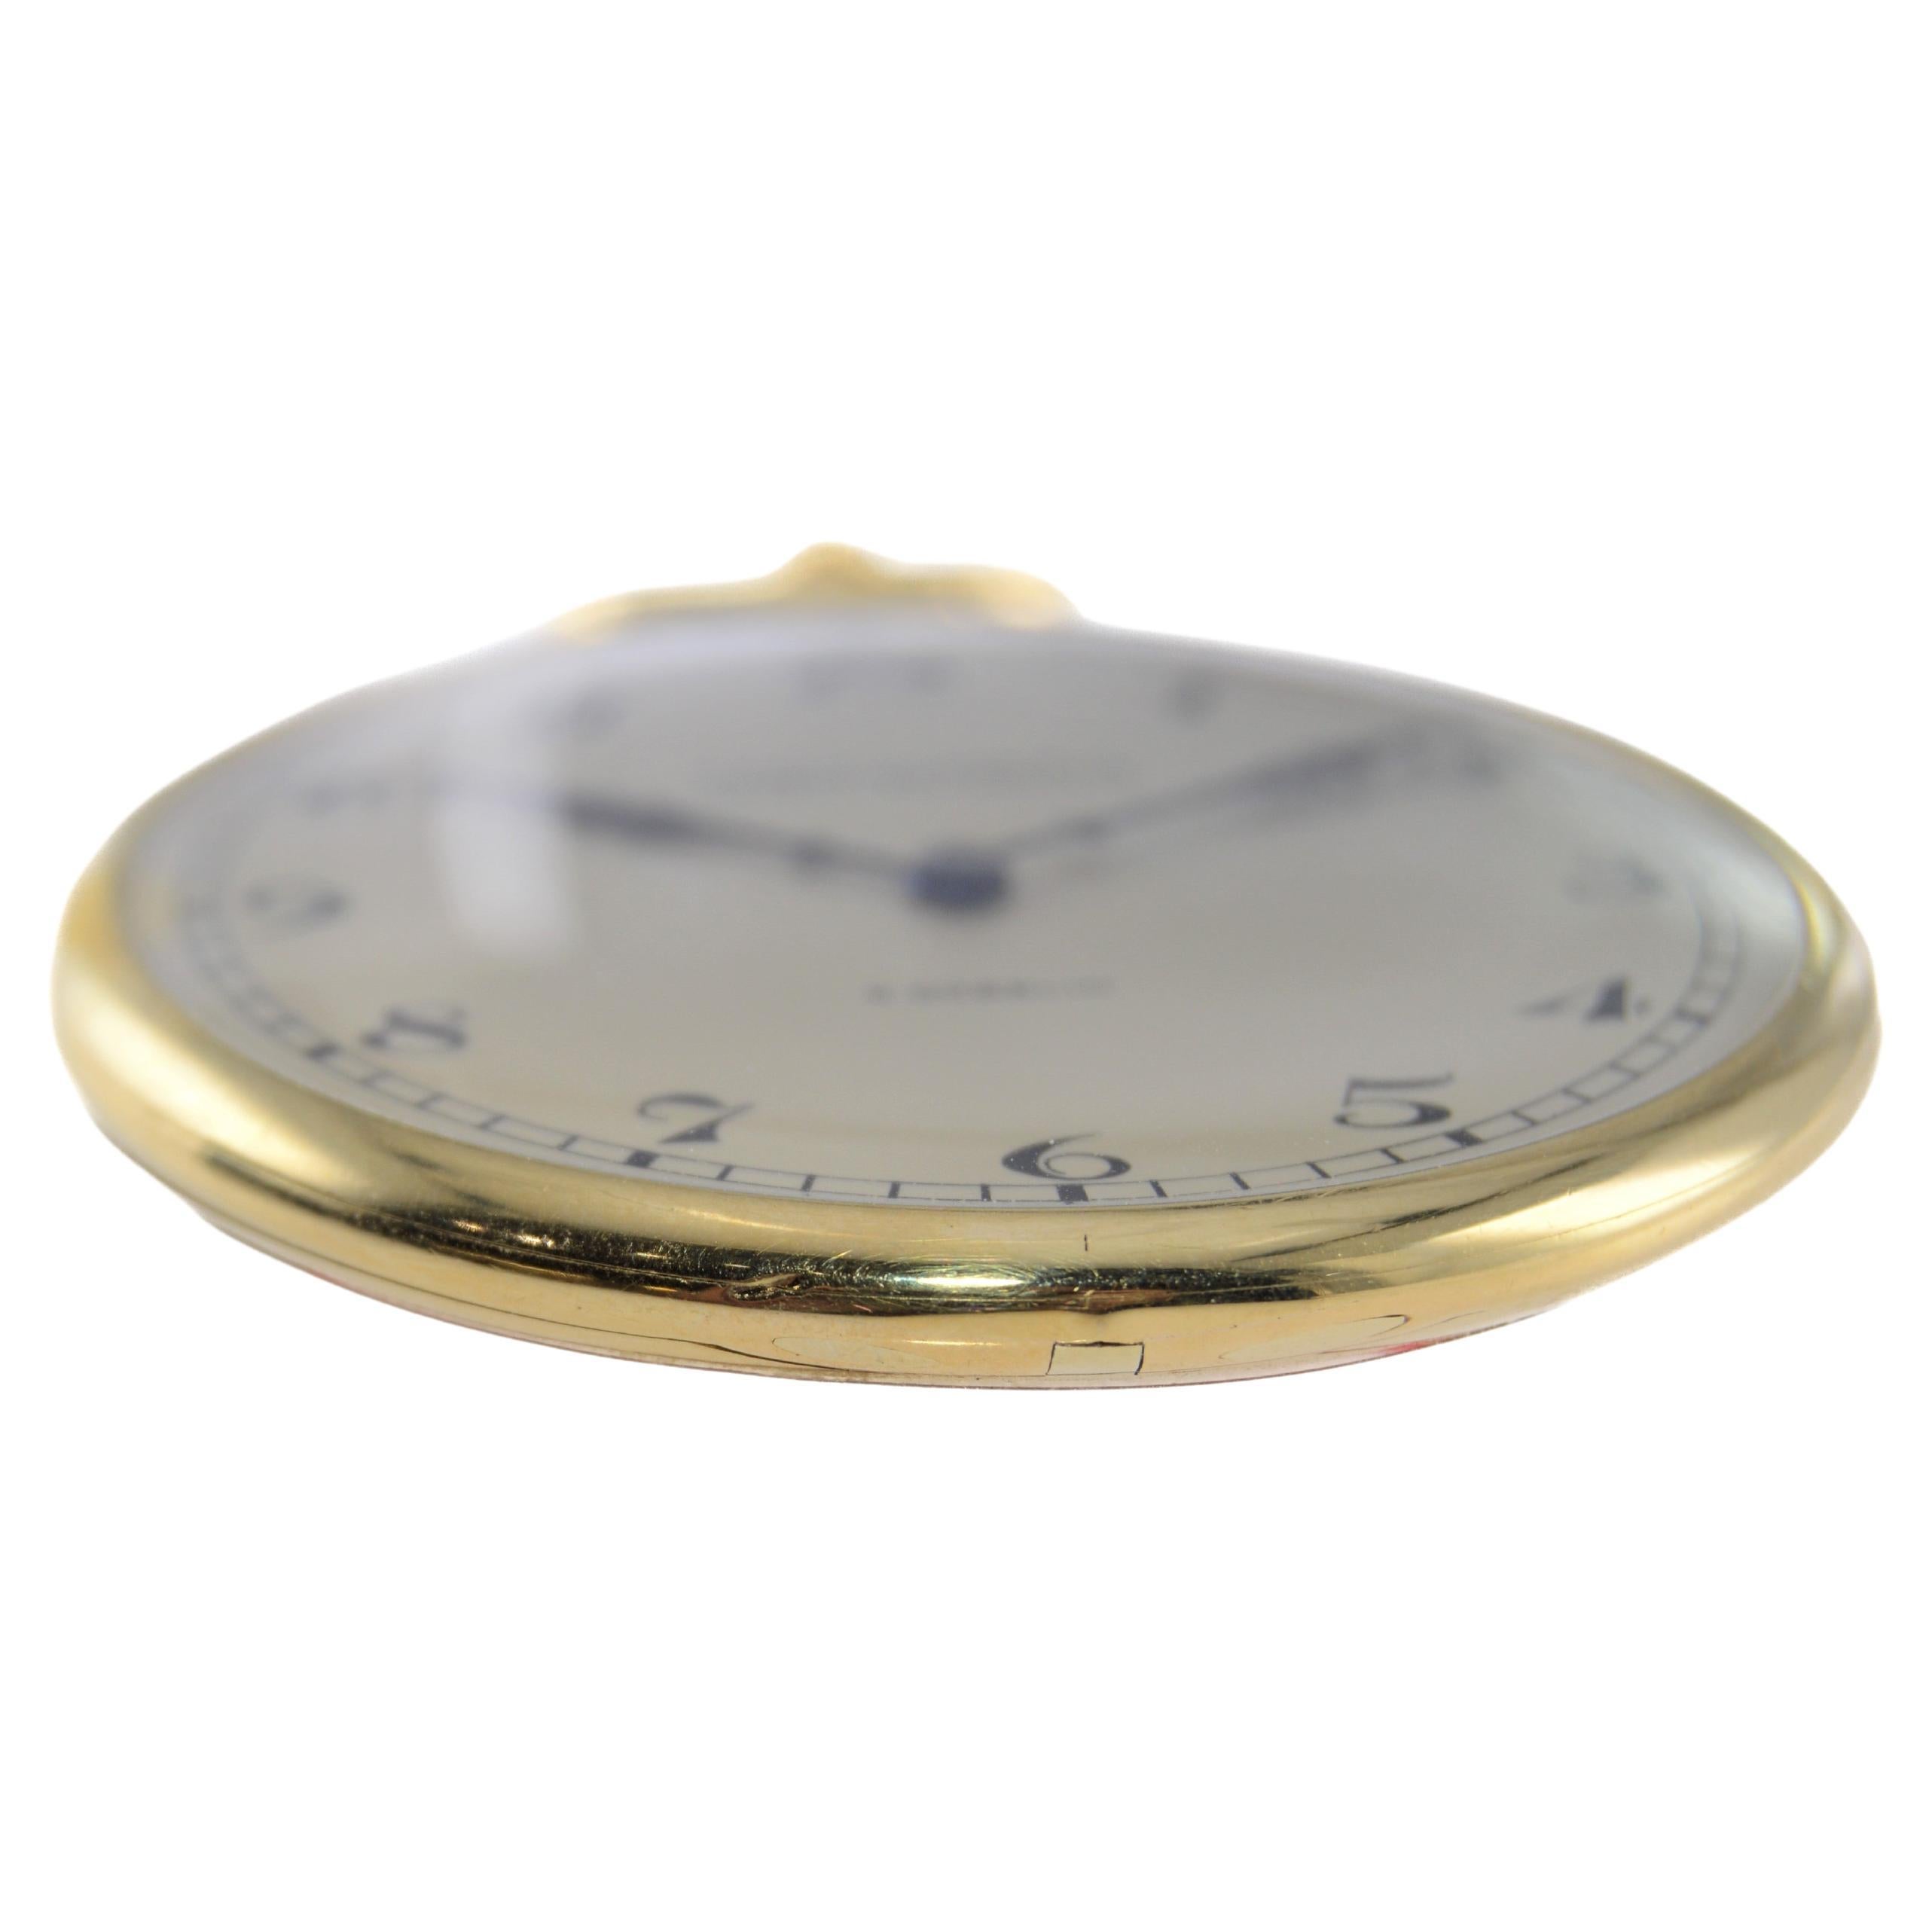 Art Deco Patek Philippe 18 Kt Yellow Gold Ultra Thin Pocket Watch, Worlds Thinnest Watch For Sale